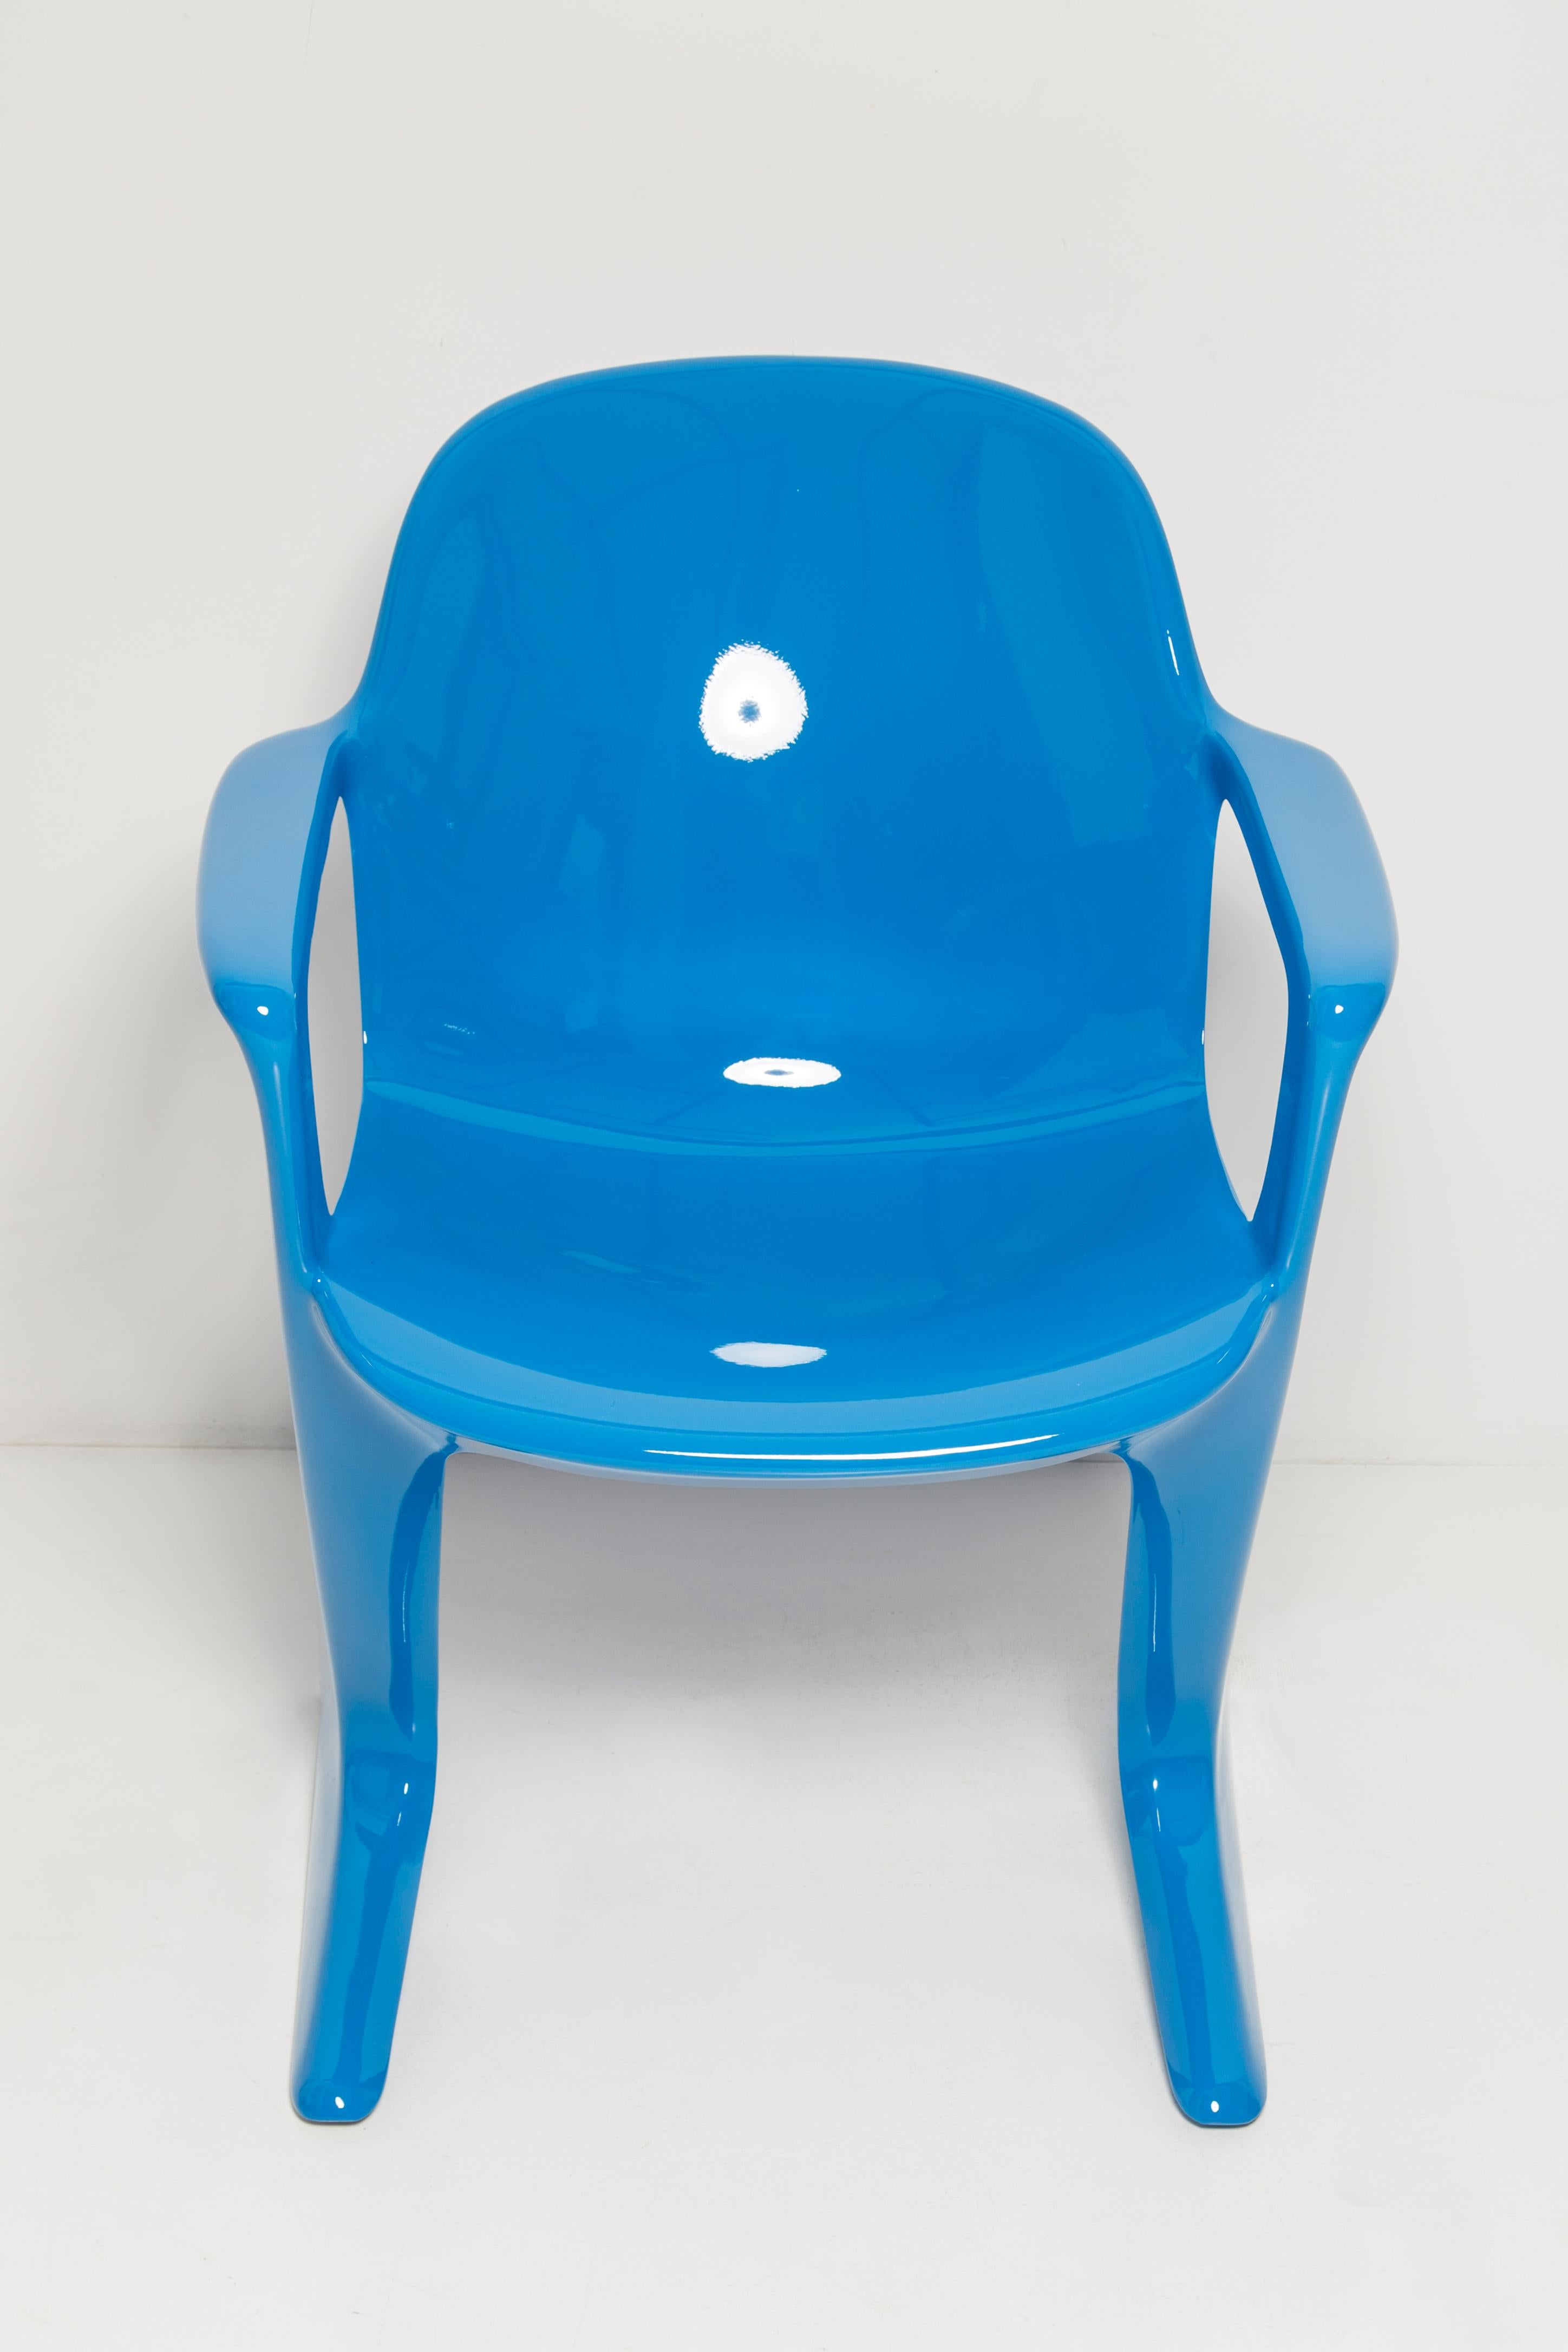 Set of Two Blue Kangaroo Chairs Designed by Ernst Moeckl, Germany, 1968 For Sale 4